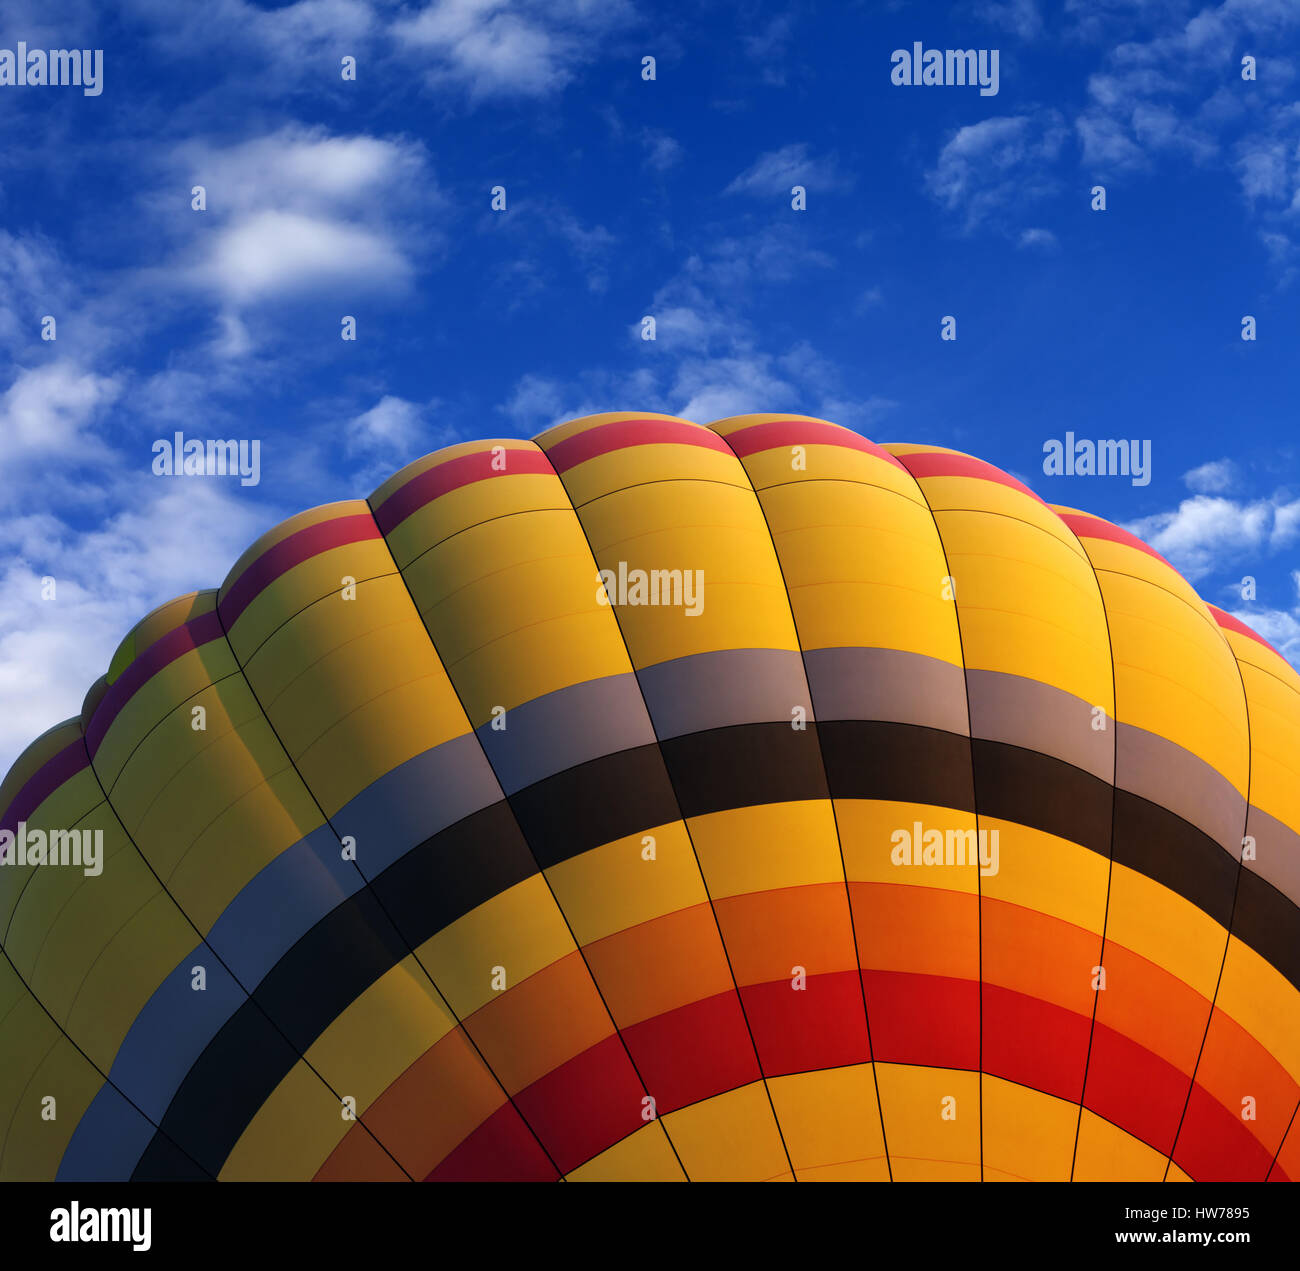 Hot air balloon on blue sky with clouds at nice sunny day. Close-up view. Stock Photo